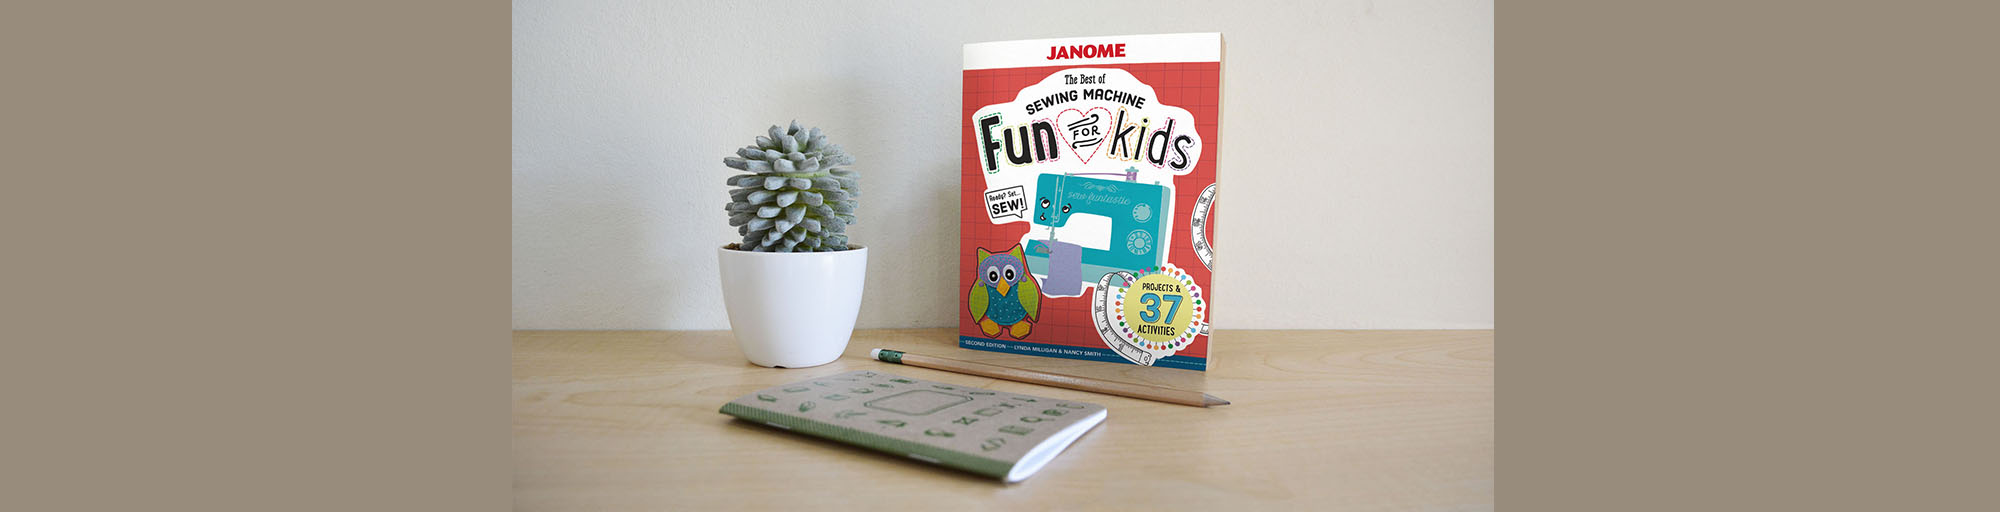 Janome Fun For Kids Sewing Book